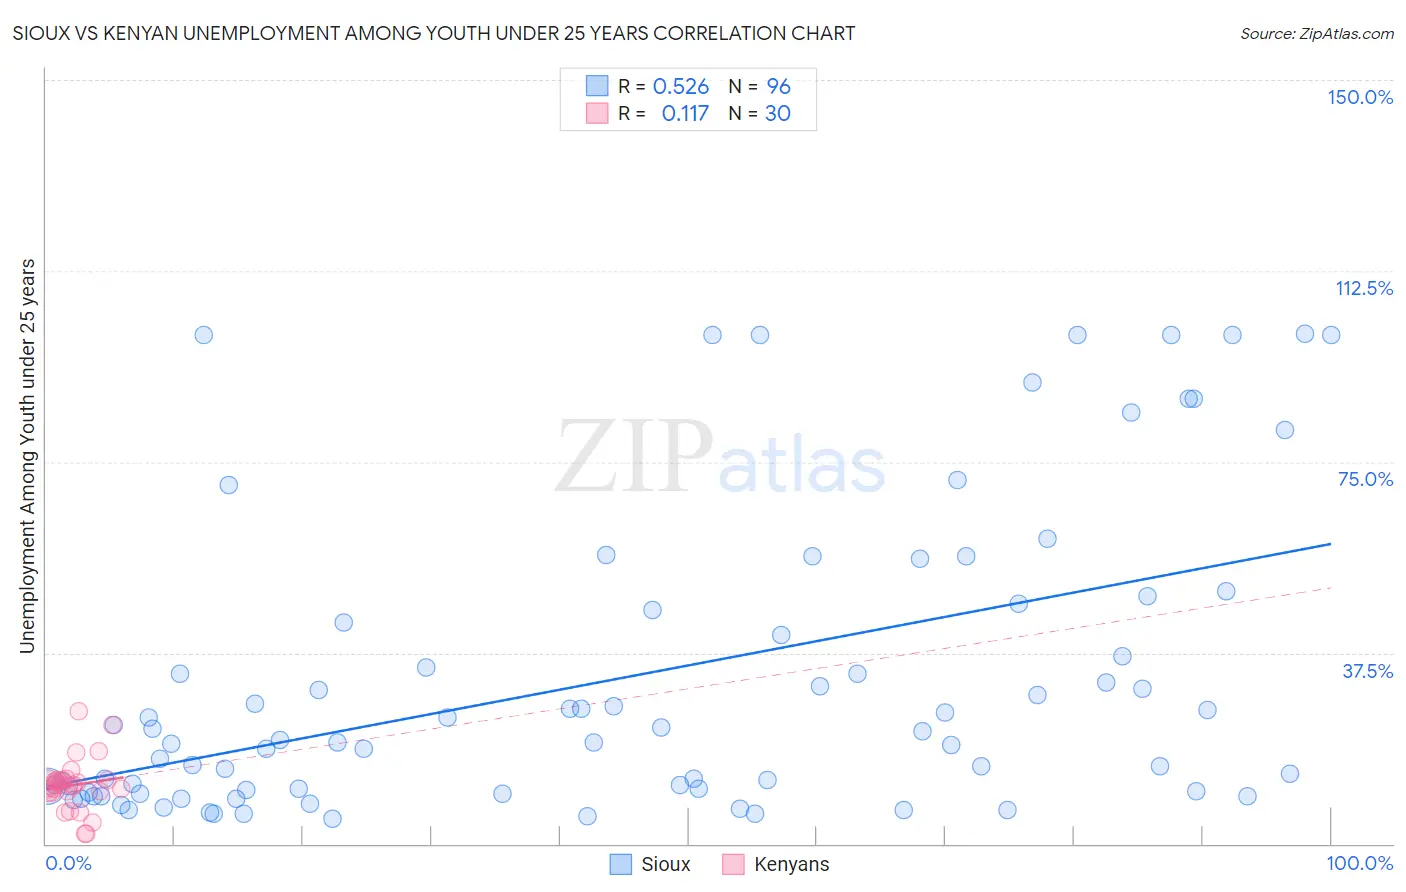 Sioux vs Kenyan Unemployment Among Youth under 25 years